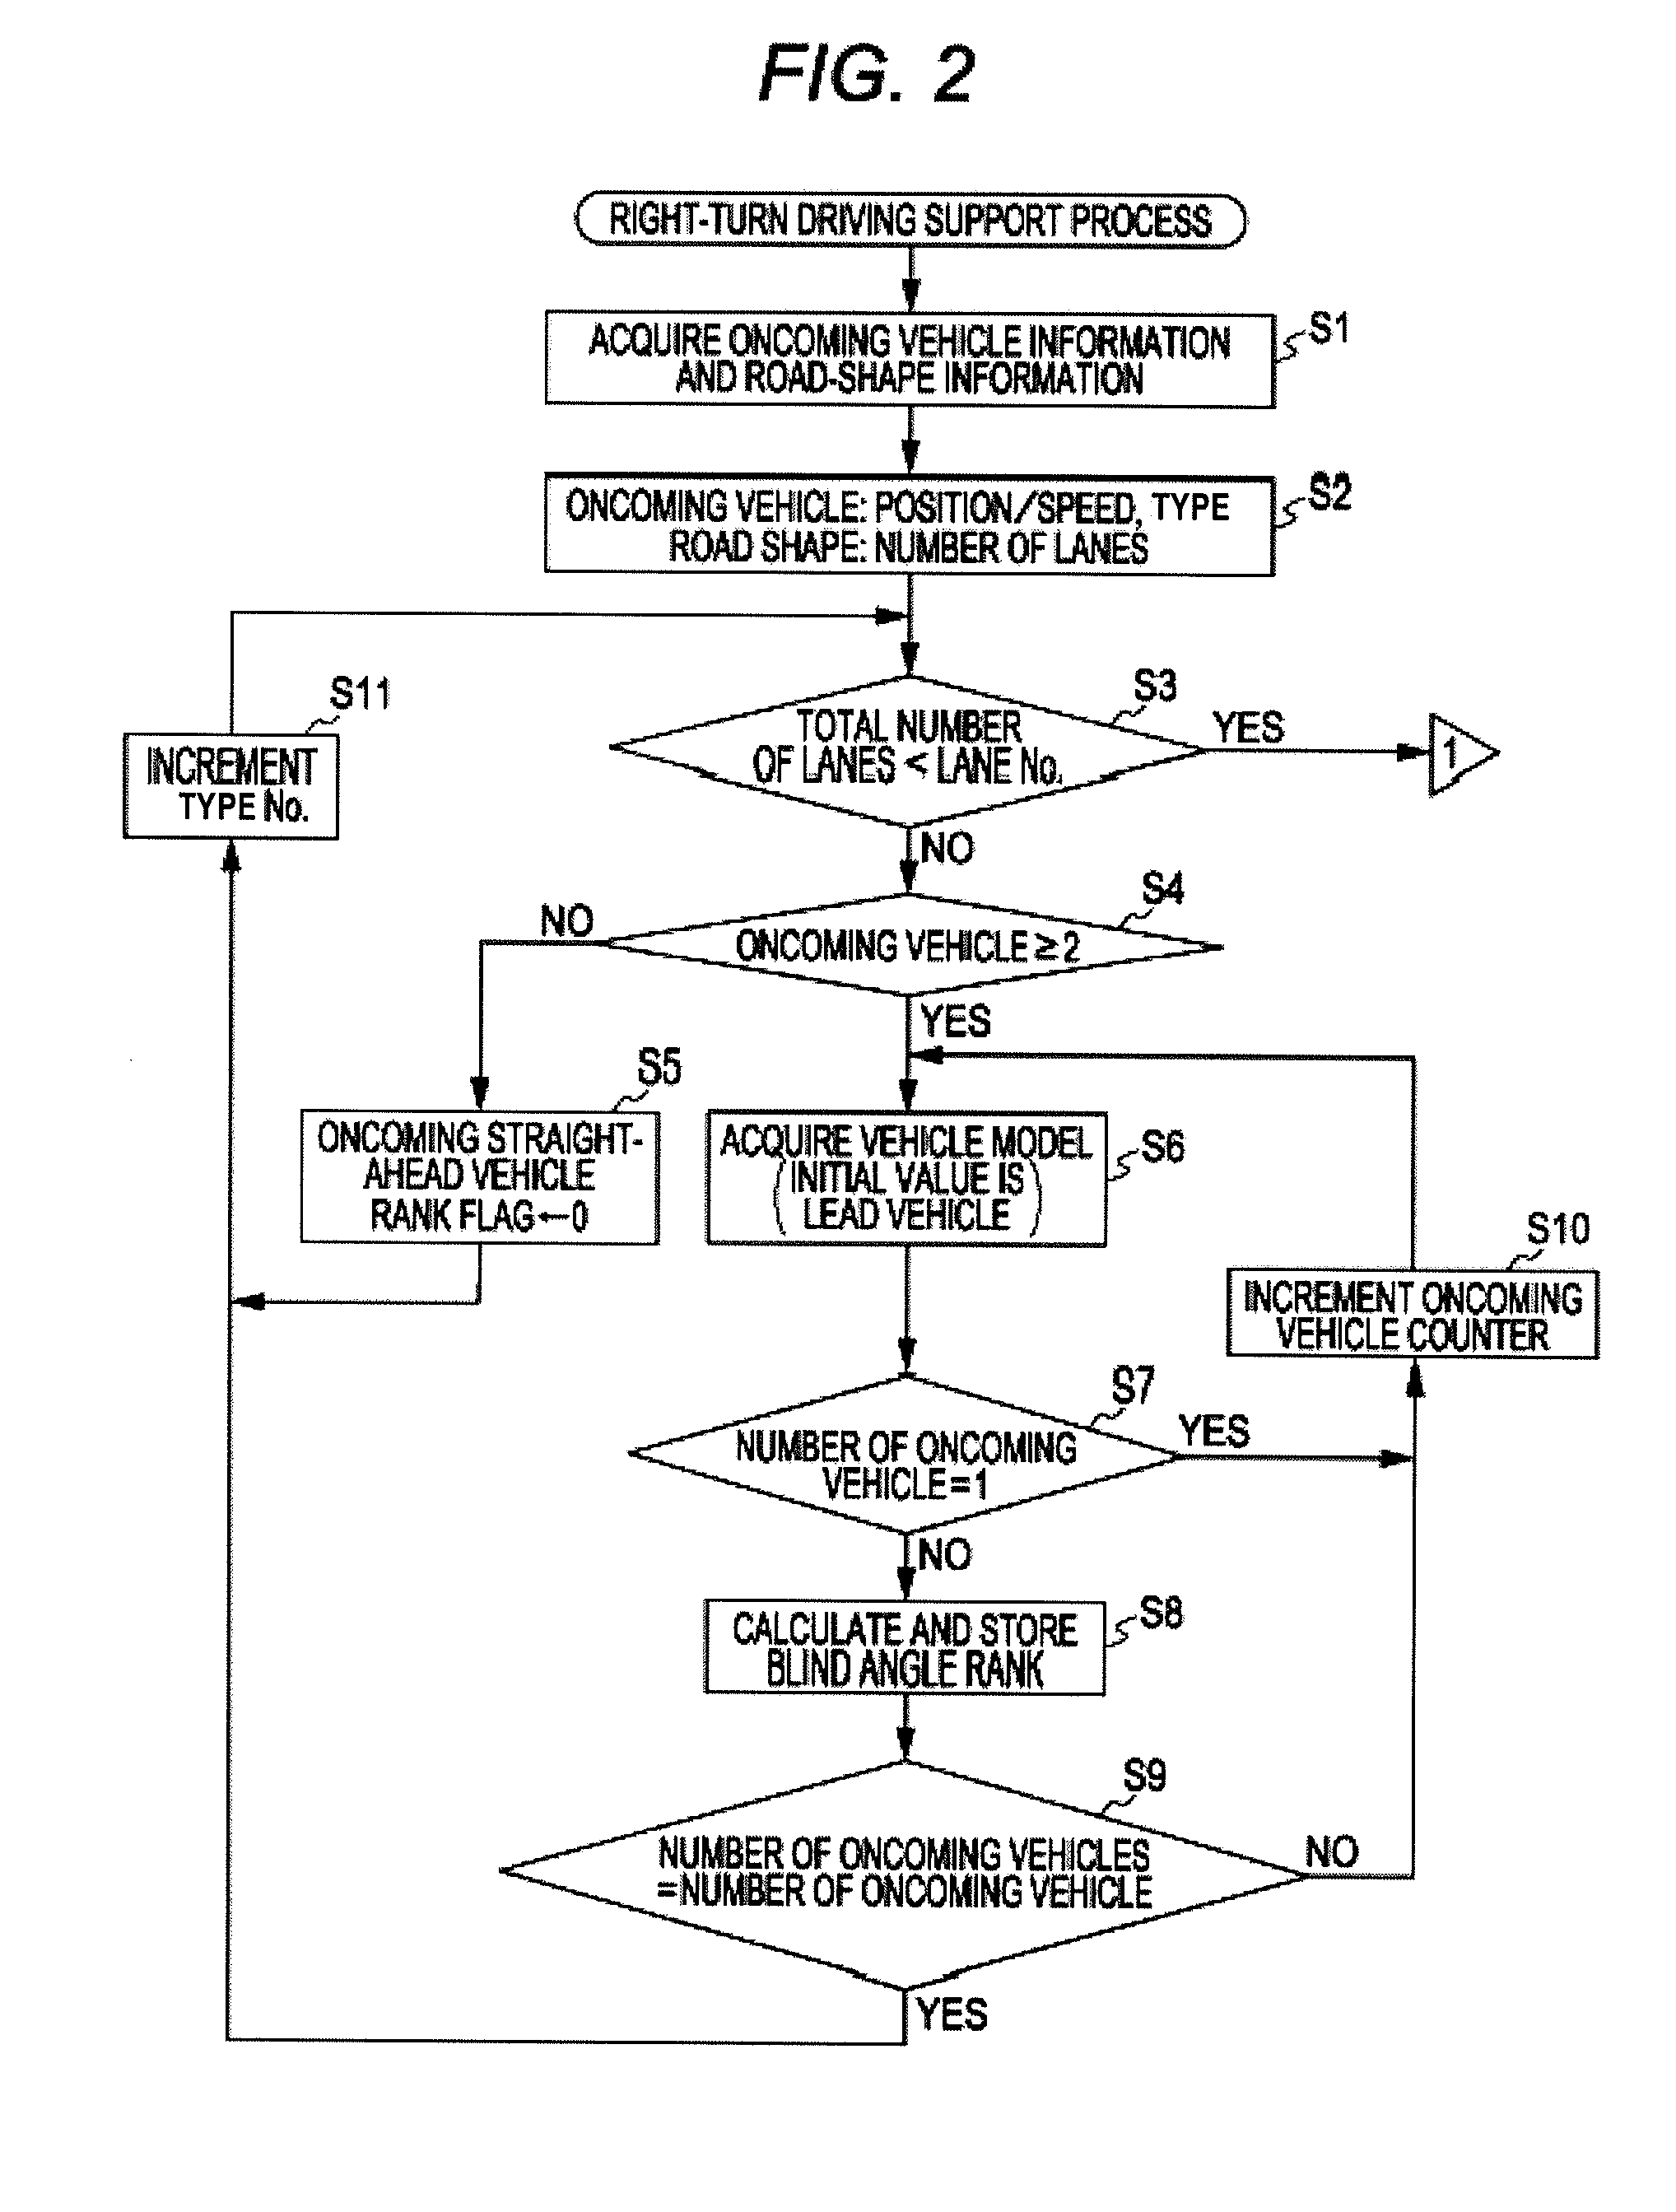 Right-turn driving support apparatus